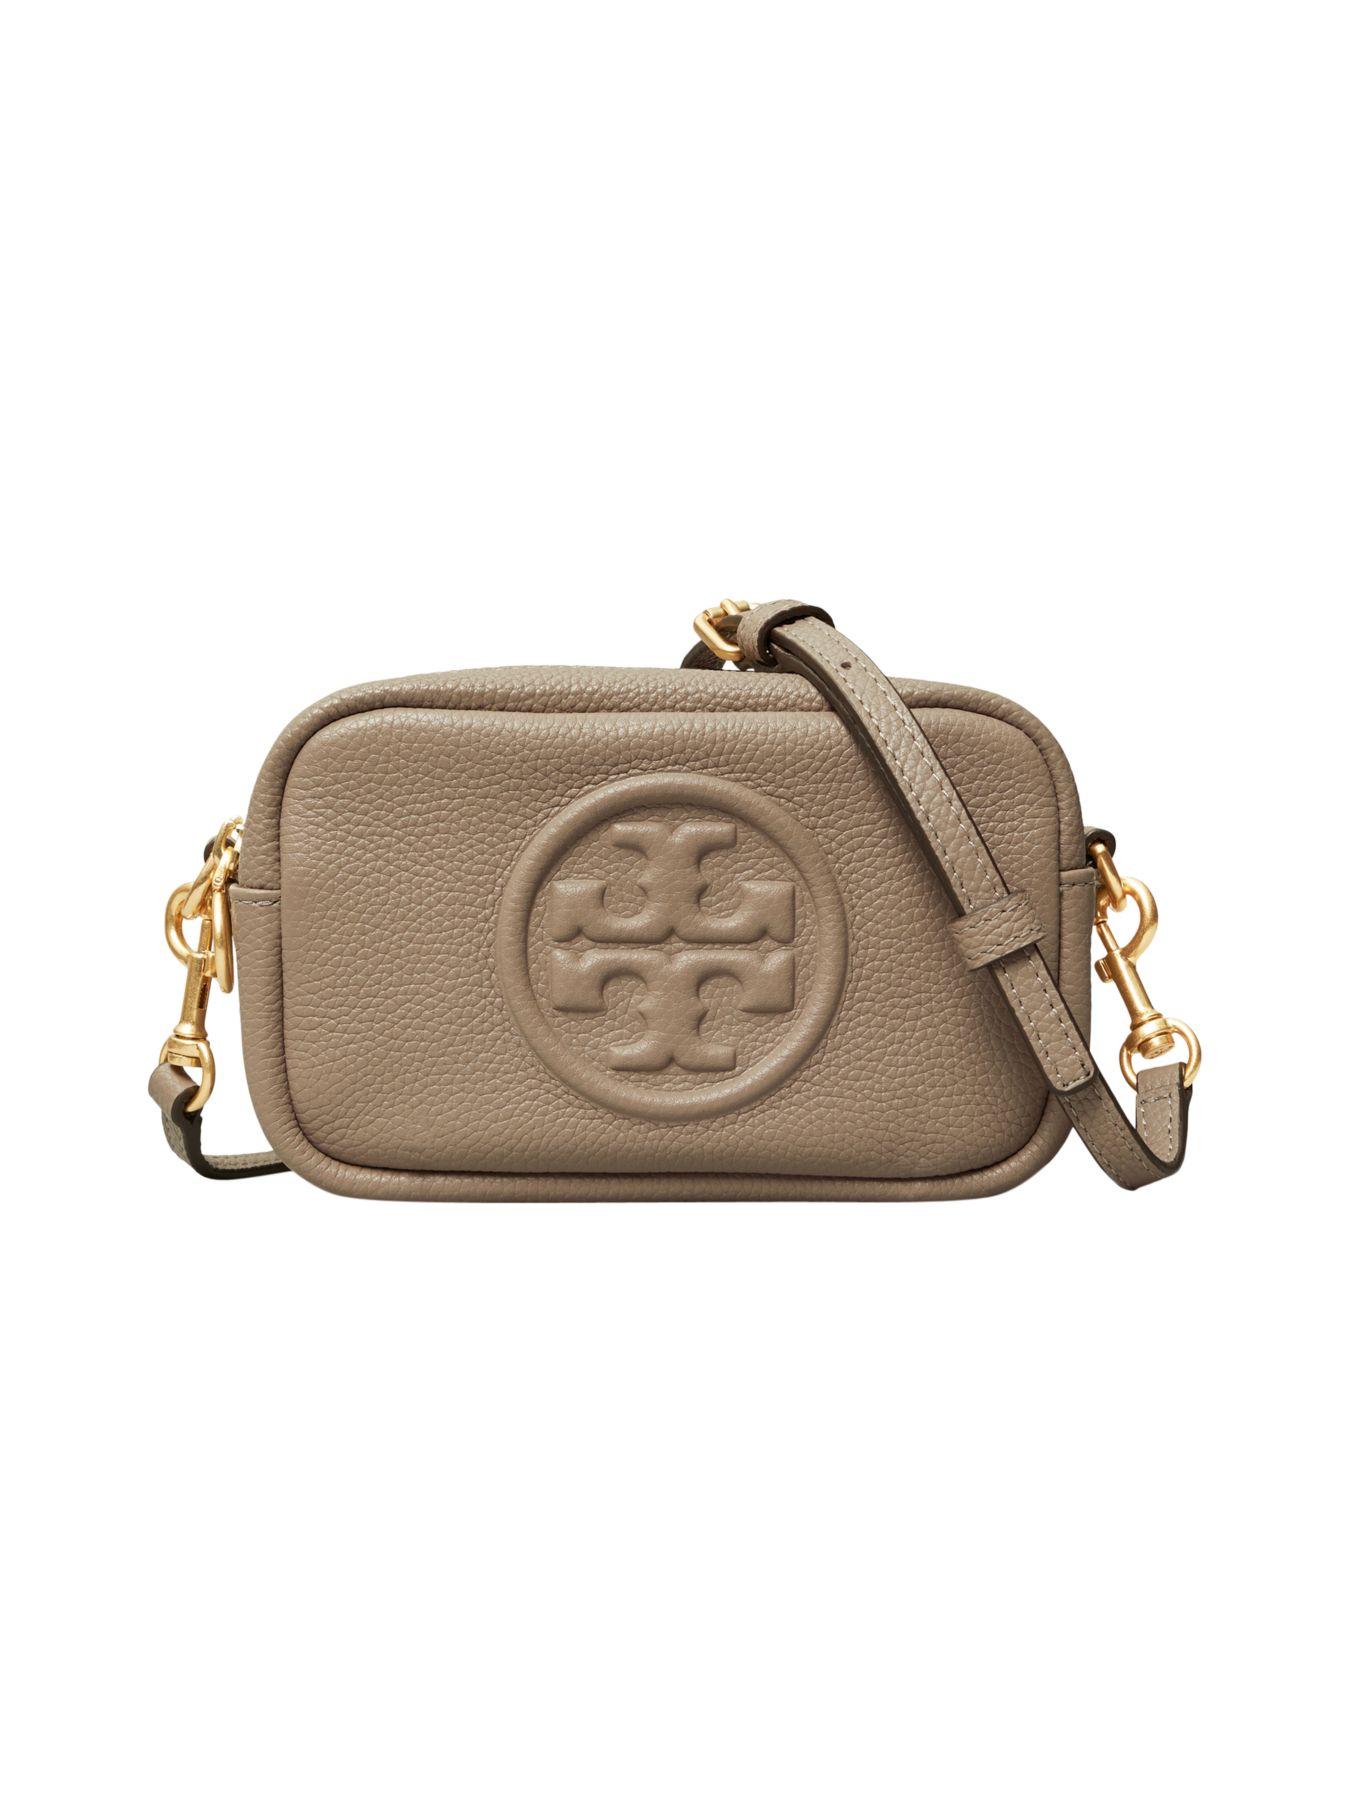 Tory Burch Mini Perry Bombé Leather Camera Bag in Gray - Lyst